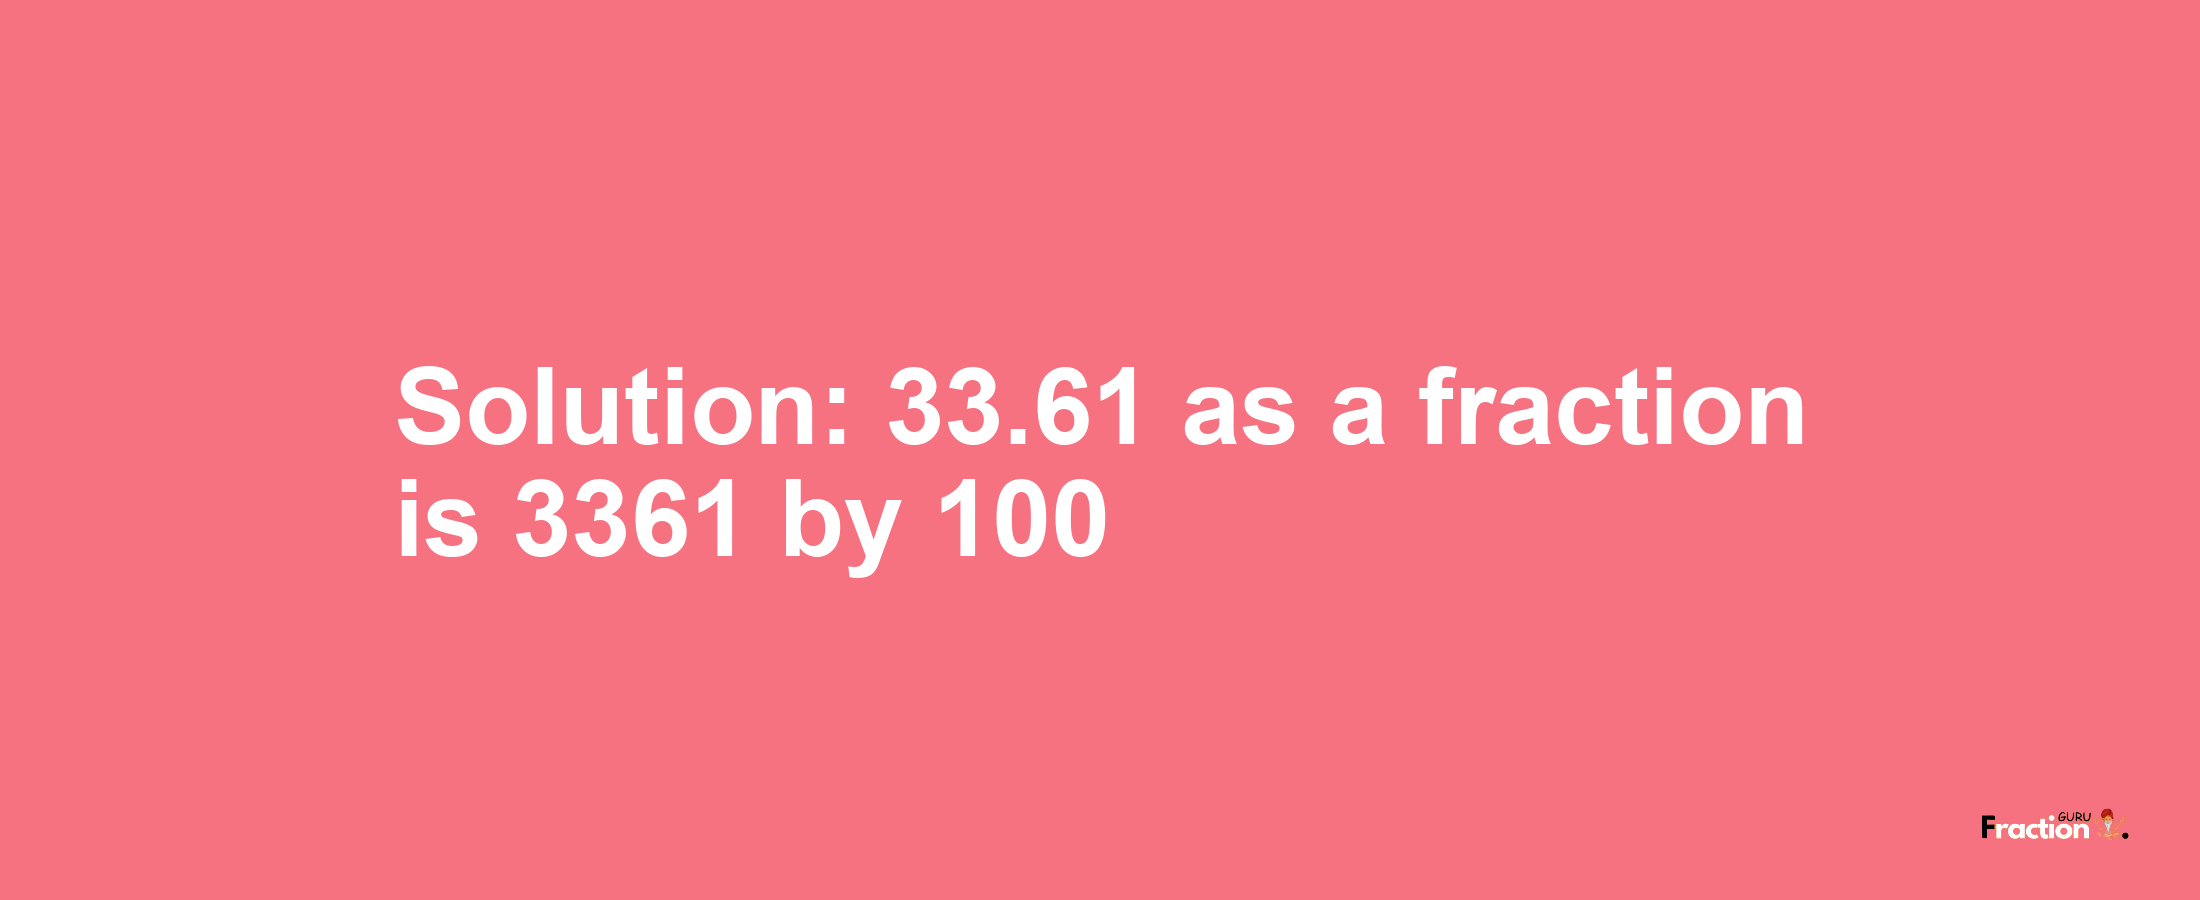 Solution:33.61 as a fraction is 3361/100